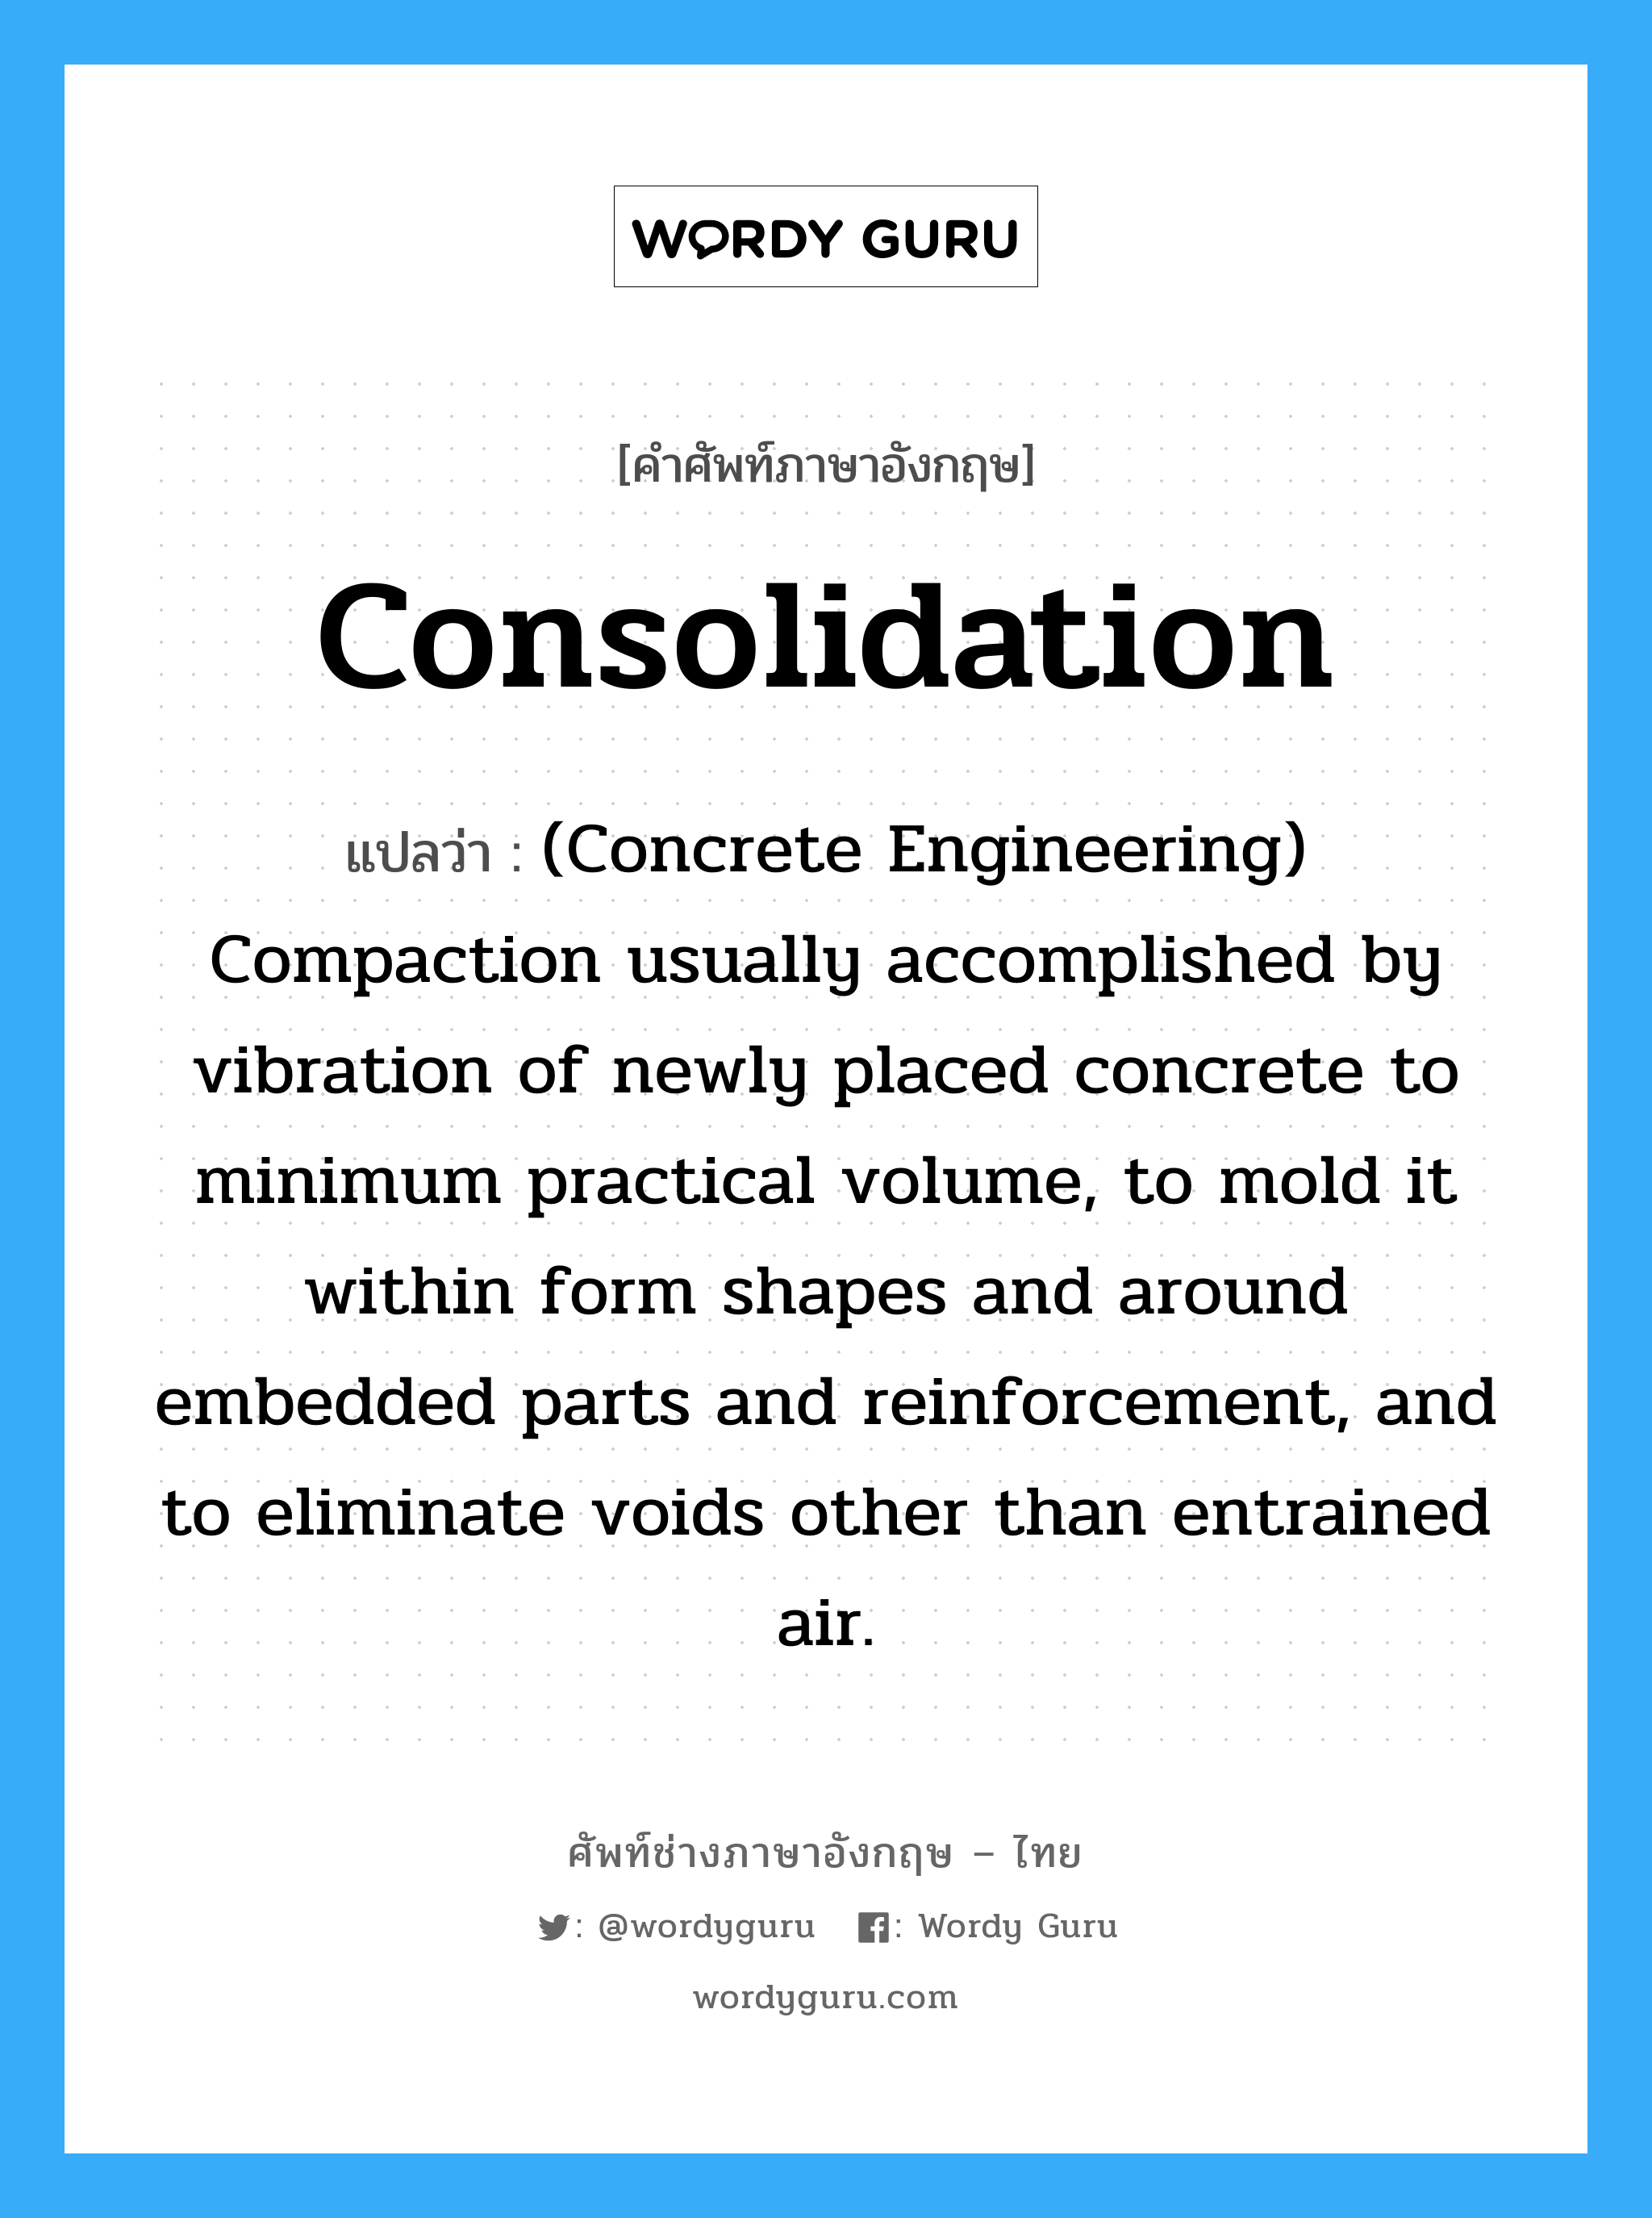 Consolidation แปลว่า?, คำศัพท์ช่างภาษาอังกฤษ - ไทย Consolidation คำศัพท์ภาษาอังกฤษ Consolidation แปลว่า (Concrete Engineering) Compaction usually accomplished by vibration of newly placed concrete to minimum practical volume, to mold it within form shapes and around embedded parts and reinforcement, and to eliminate voids other than entrained air.